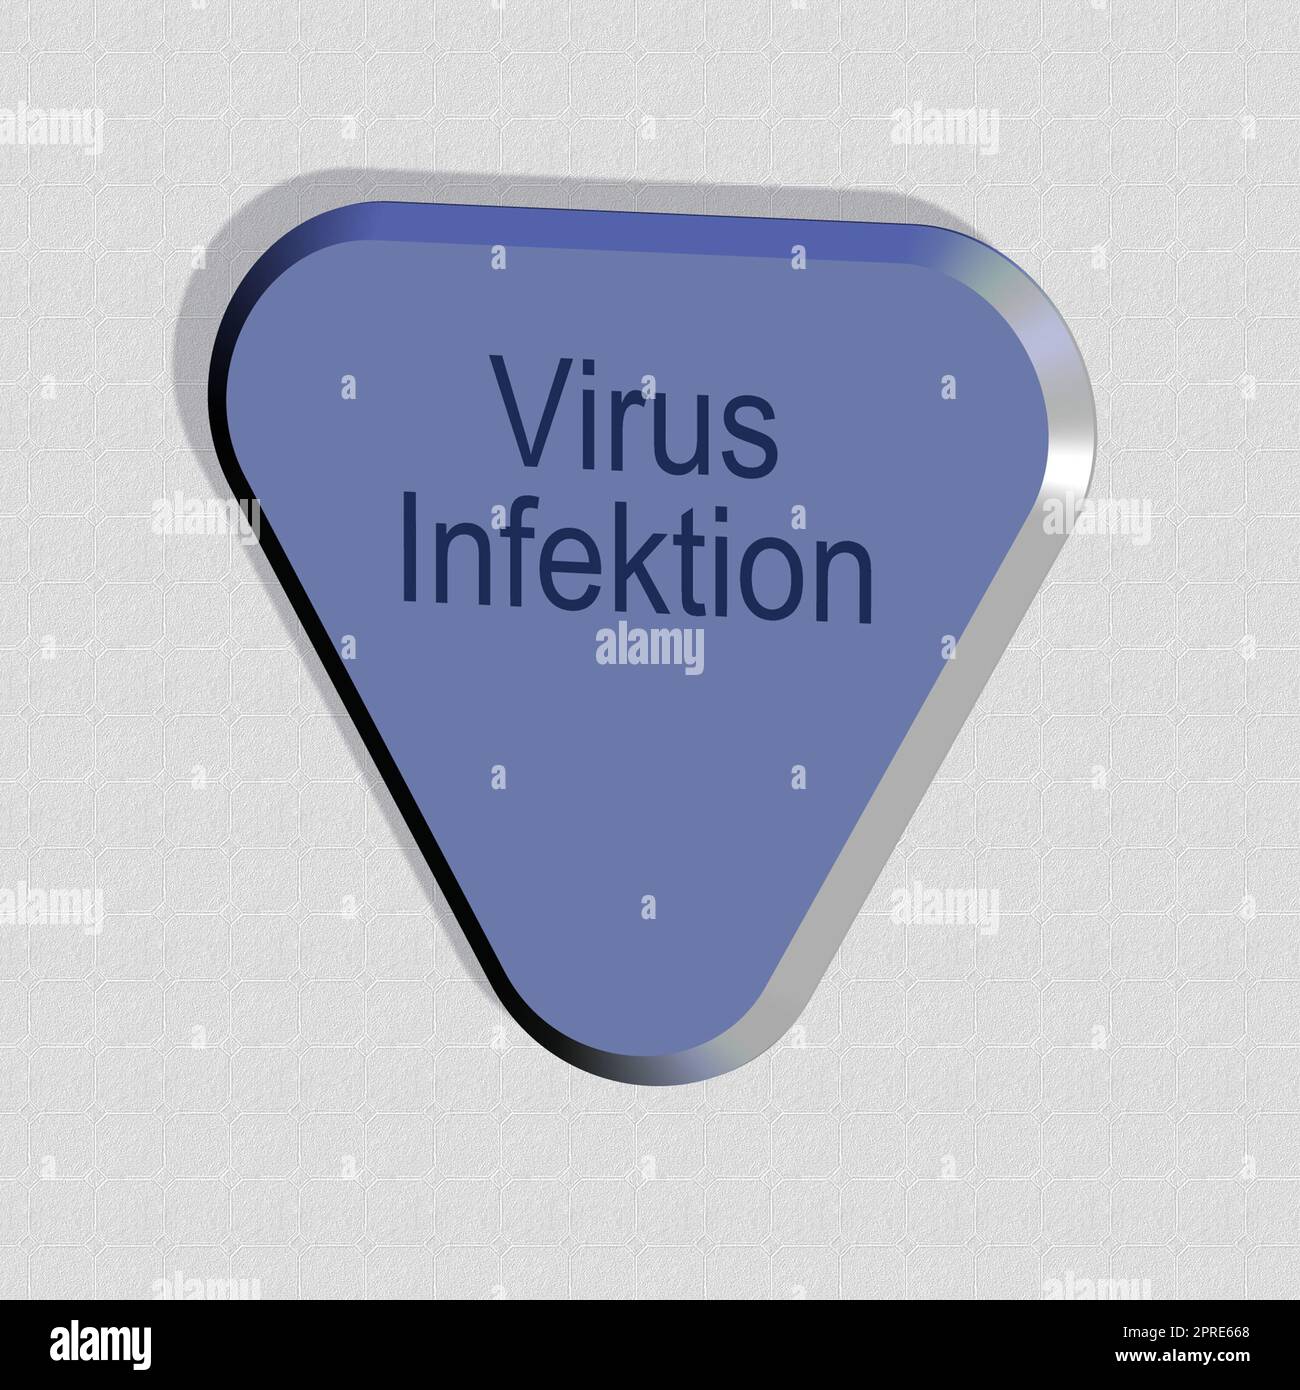 'Virusinfektion' = 'Virus infection' - word, lettering or text as a 3D illustration, 3D rendering, computer graphics Stock Photo